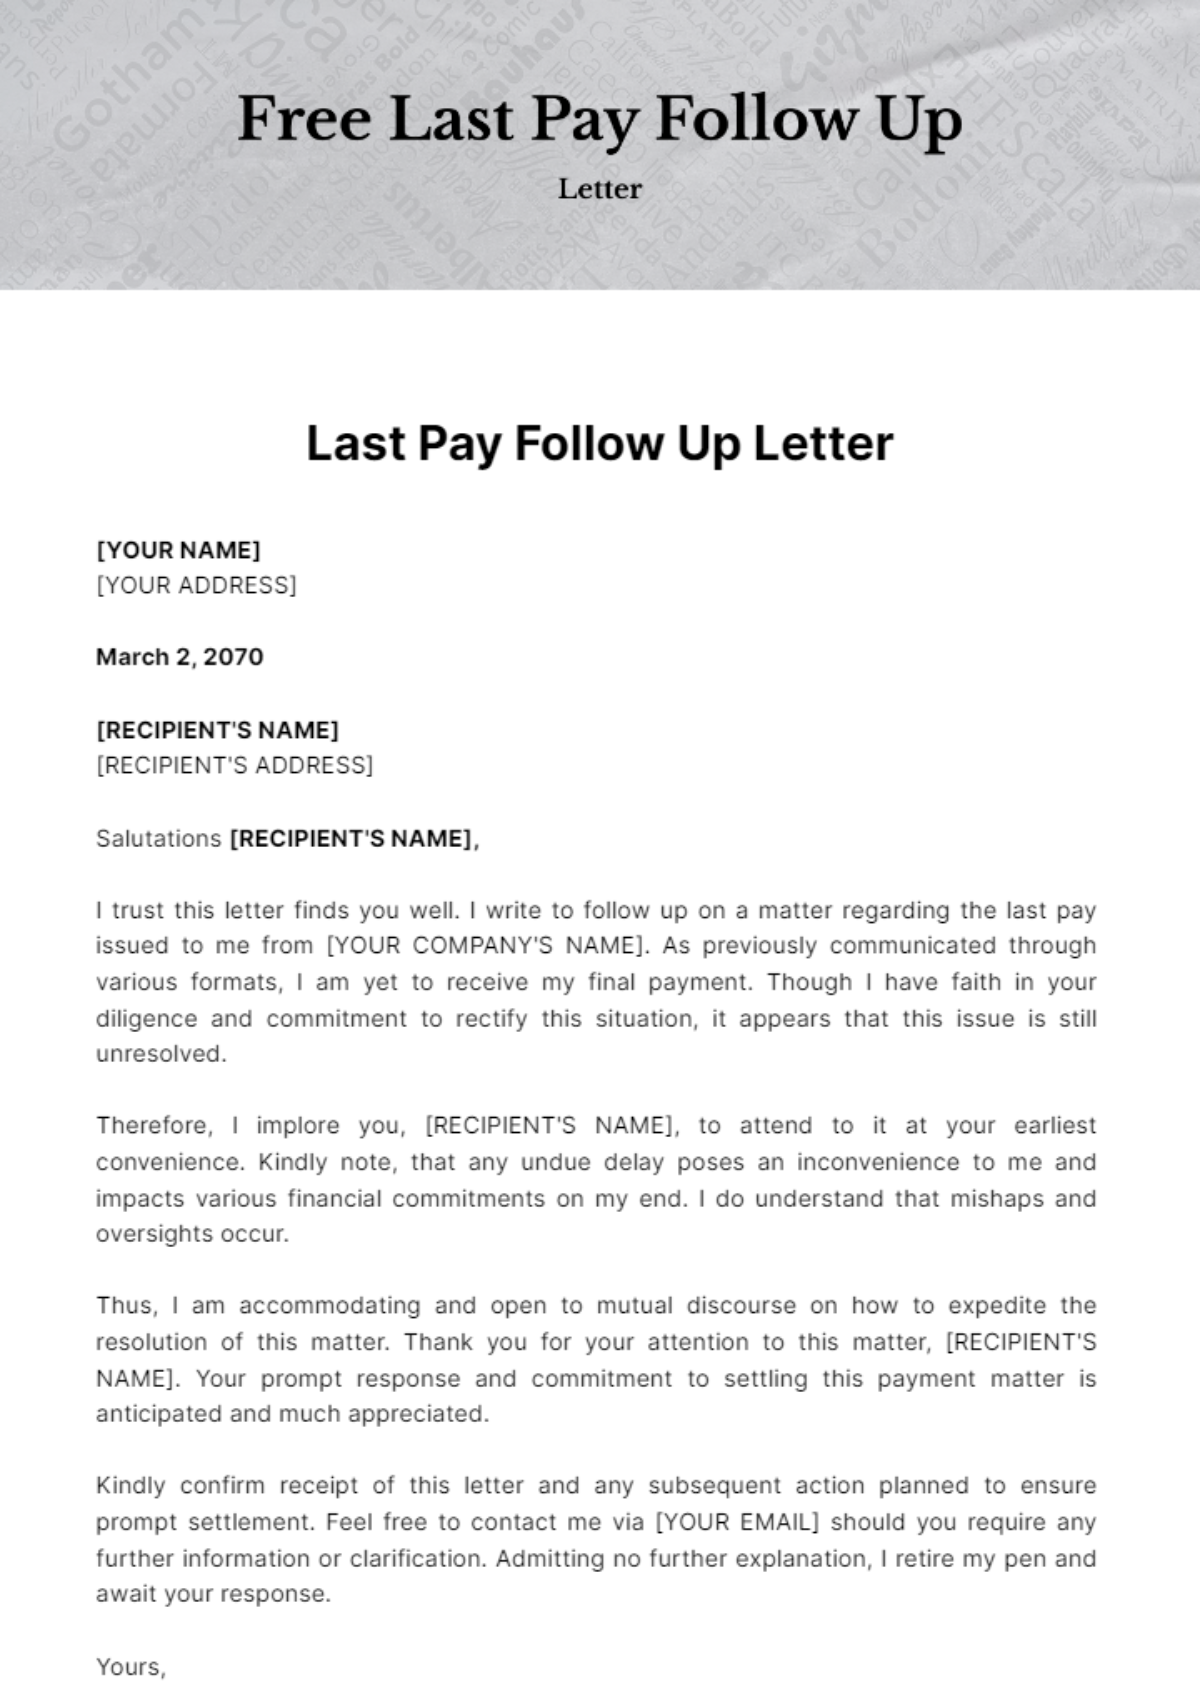 Free Last Pay Follow Up Letter Template